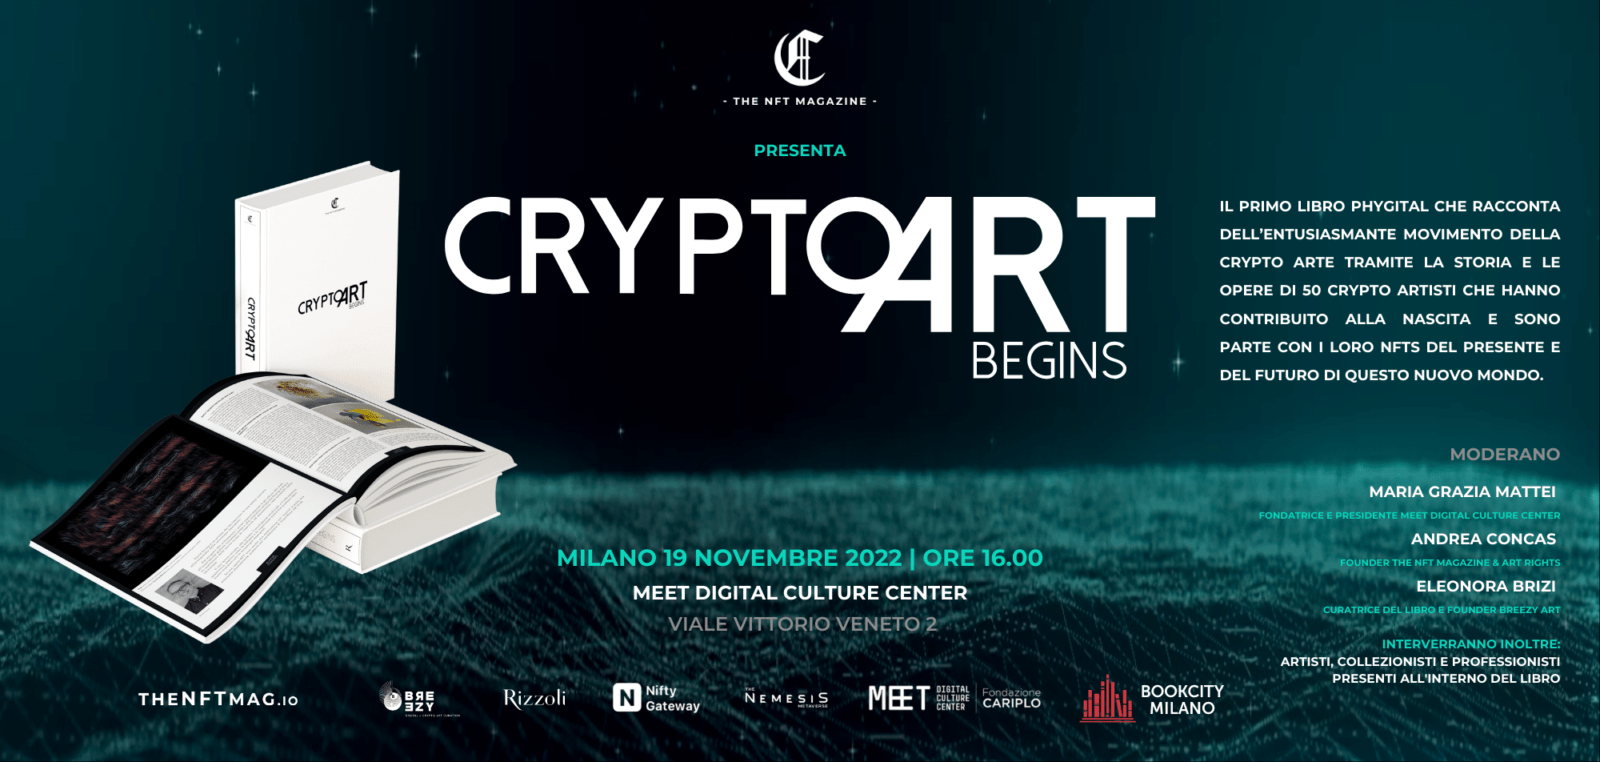 The book “Crypto Art – Begins” at MEET in Milano